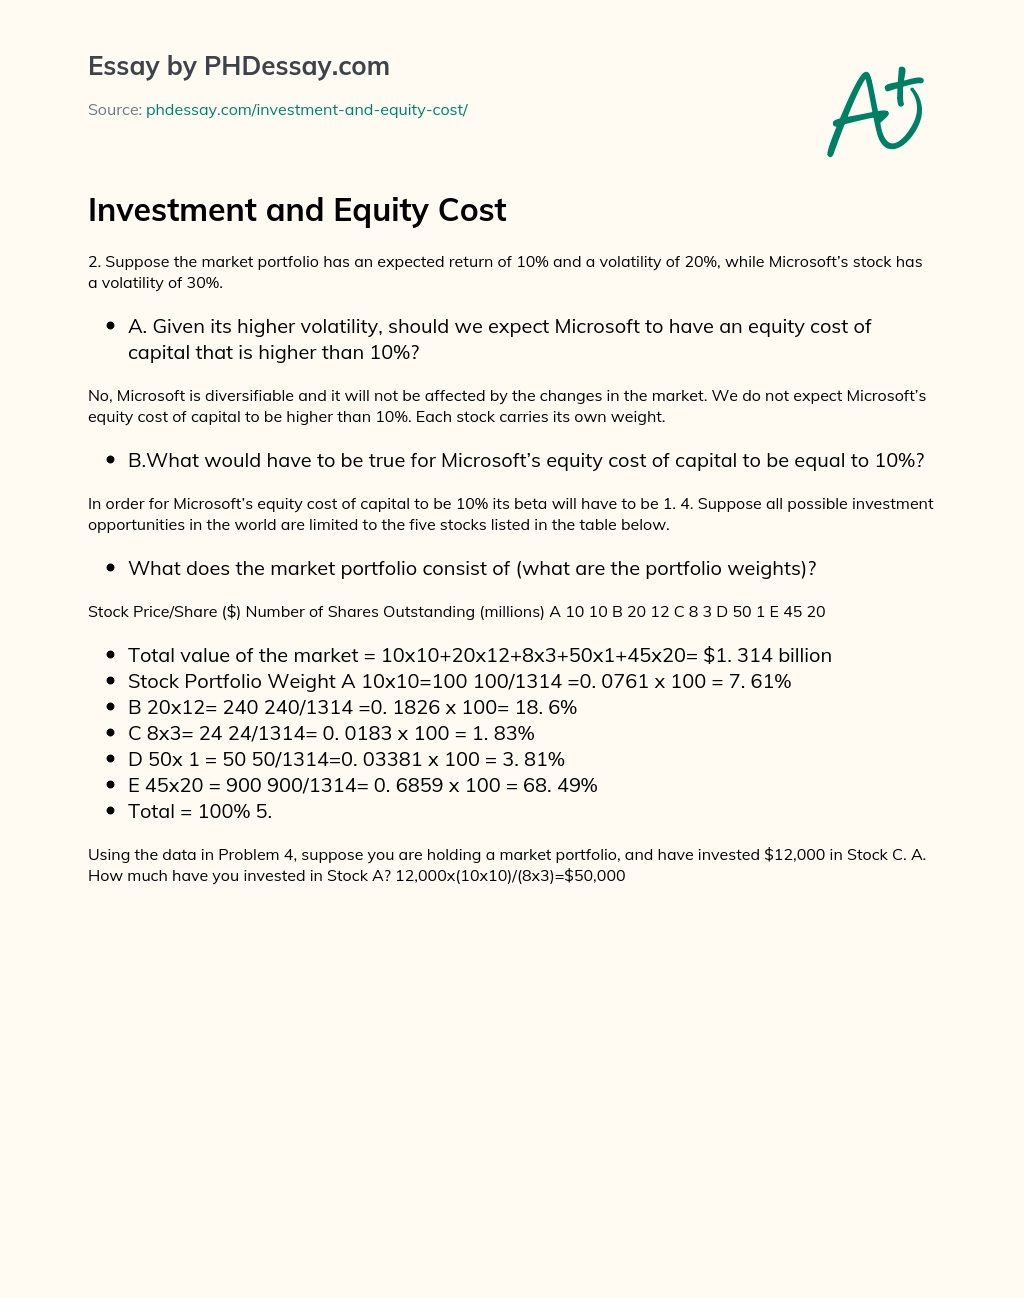 Investment and Equity Cost essay